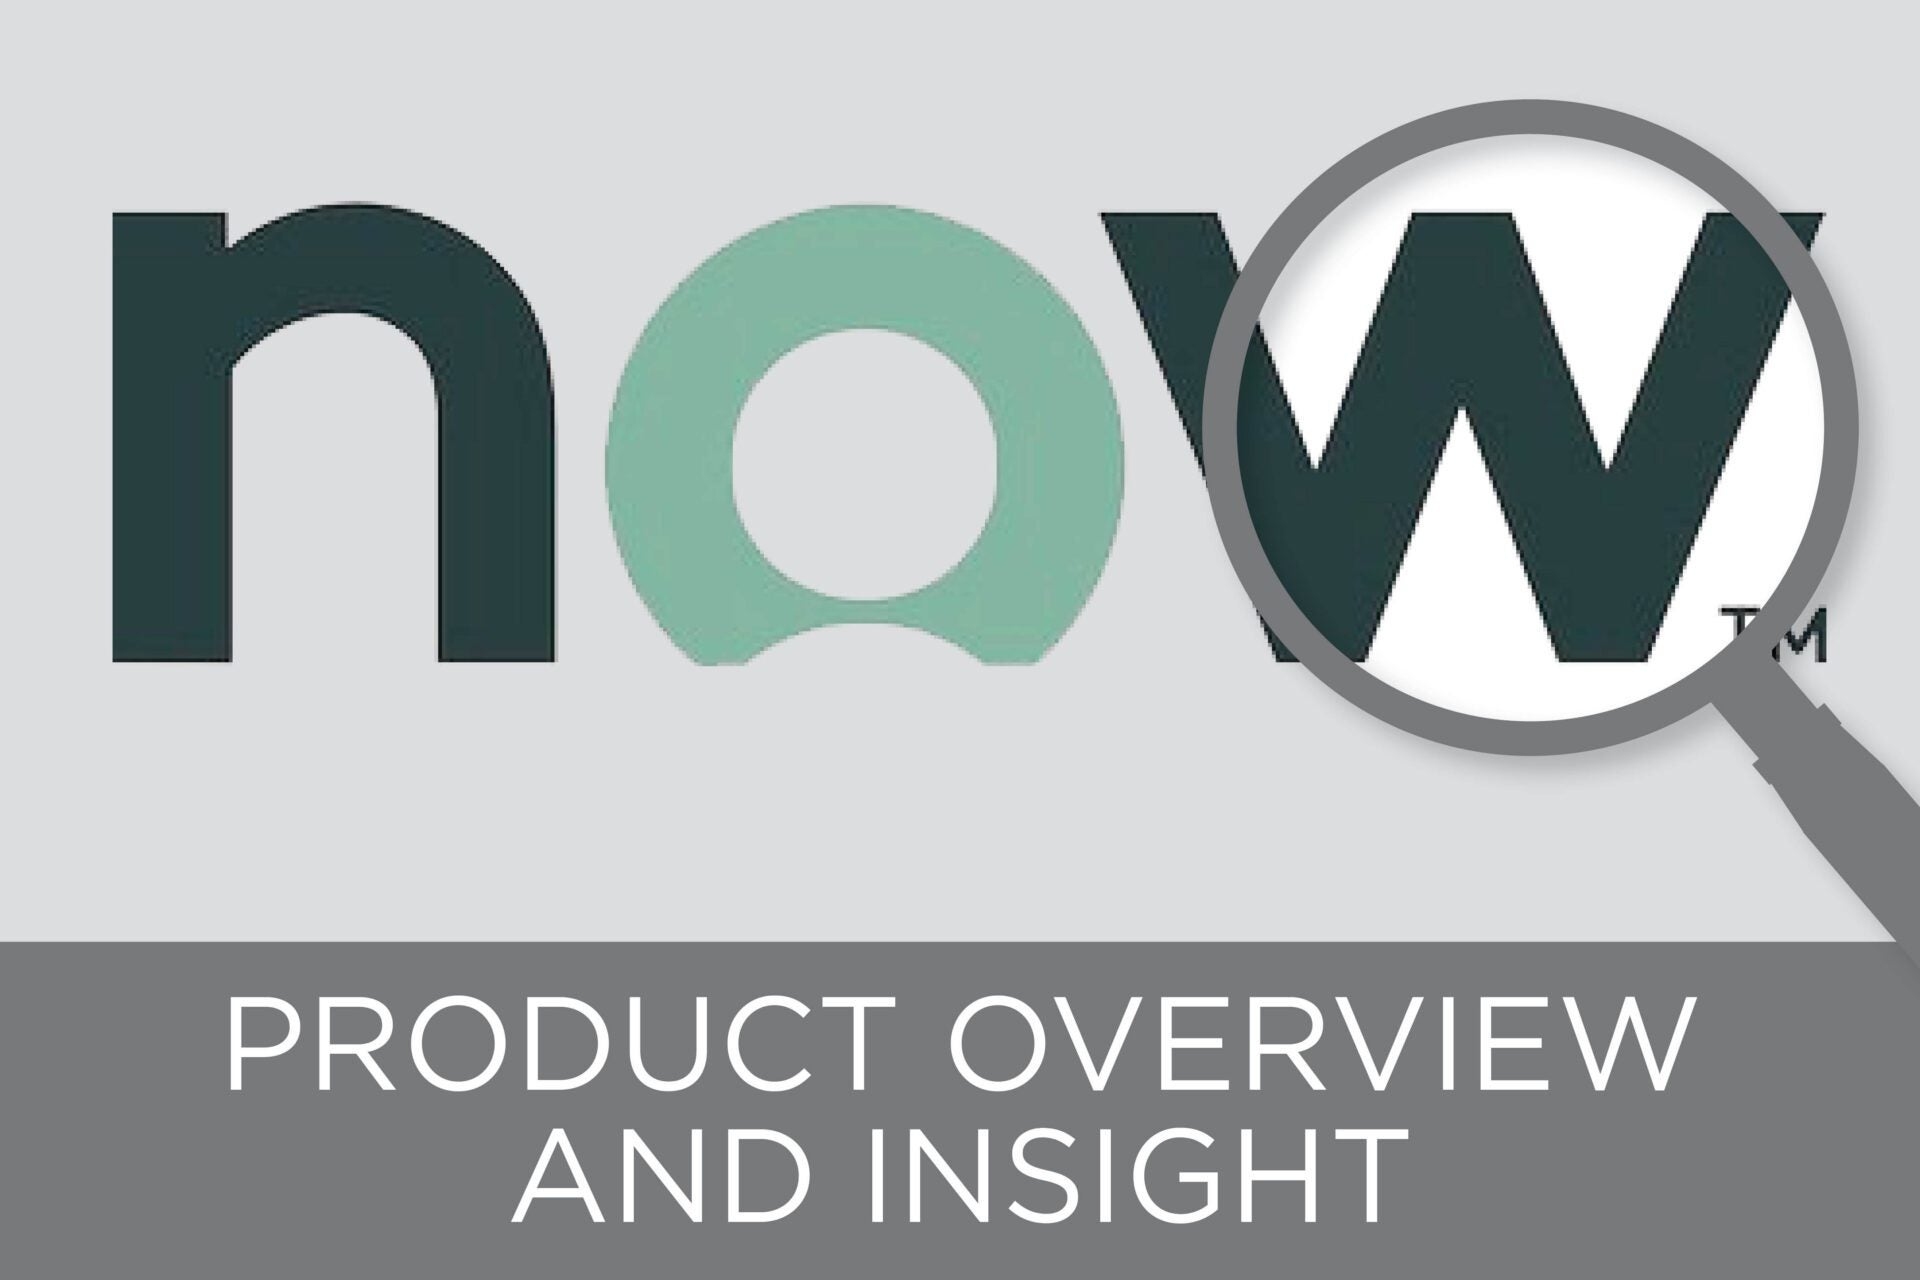 servicenow article review